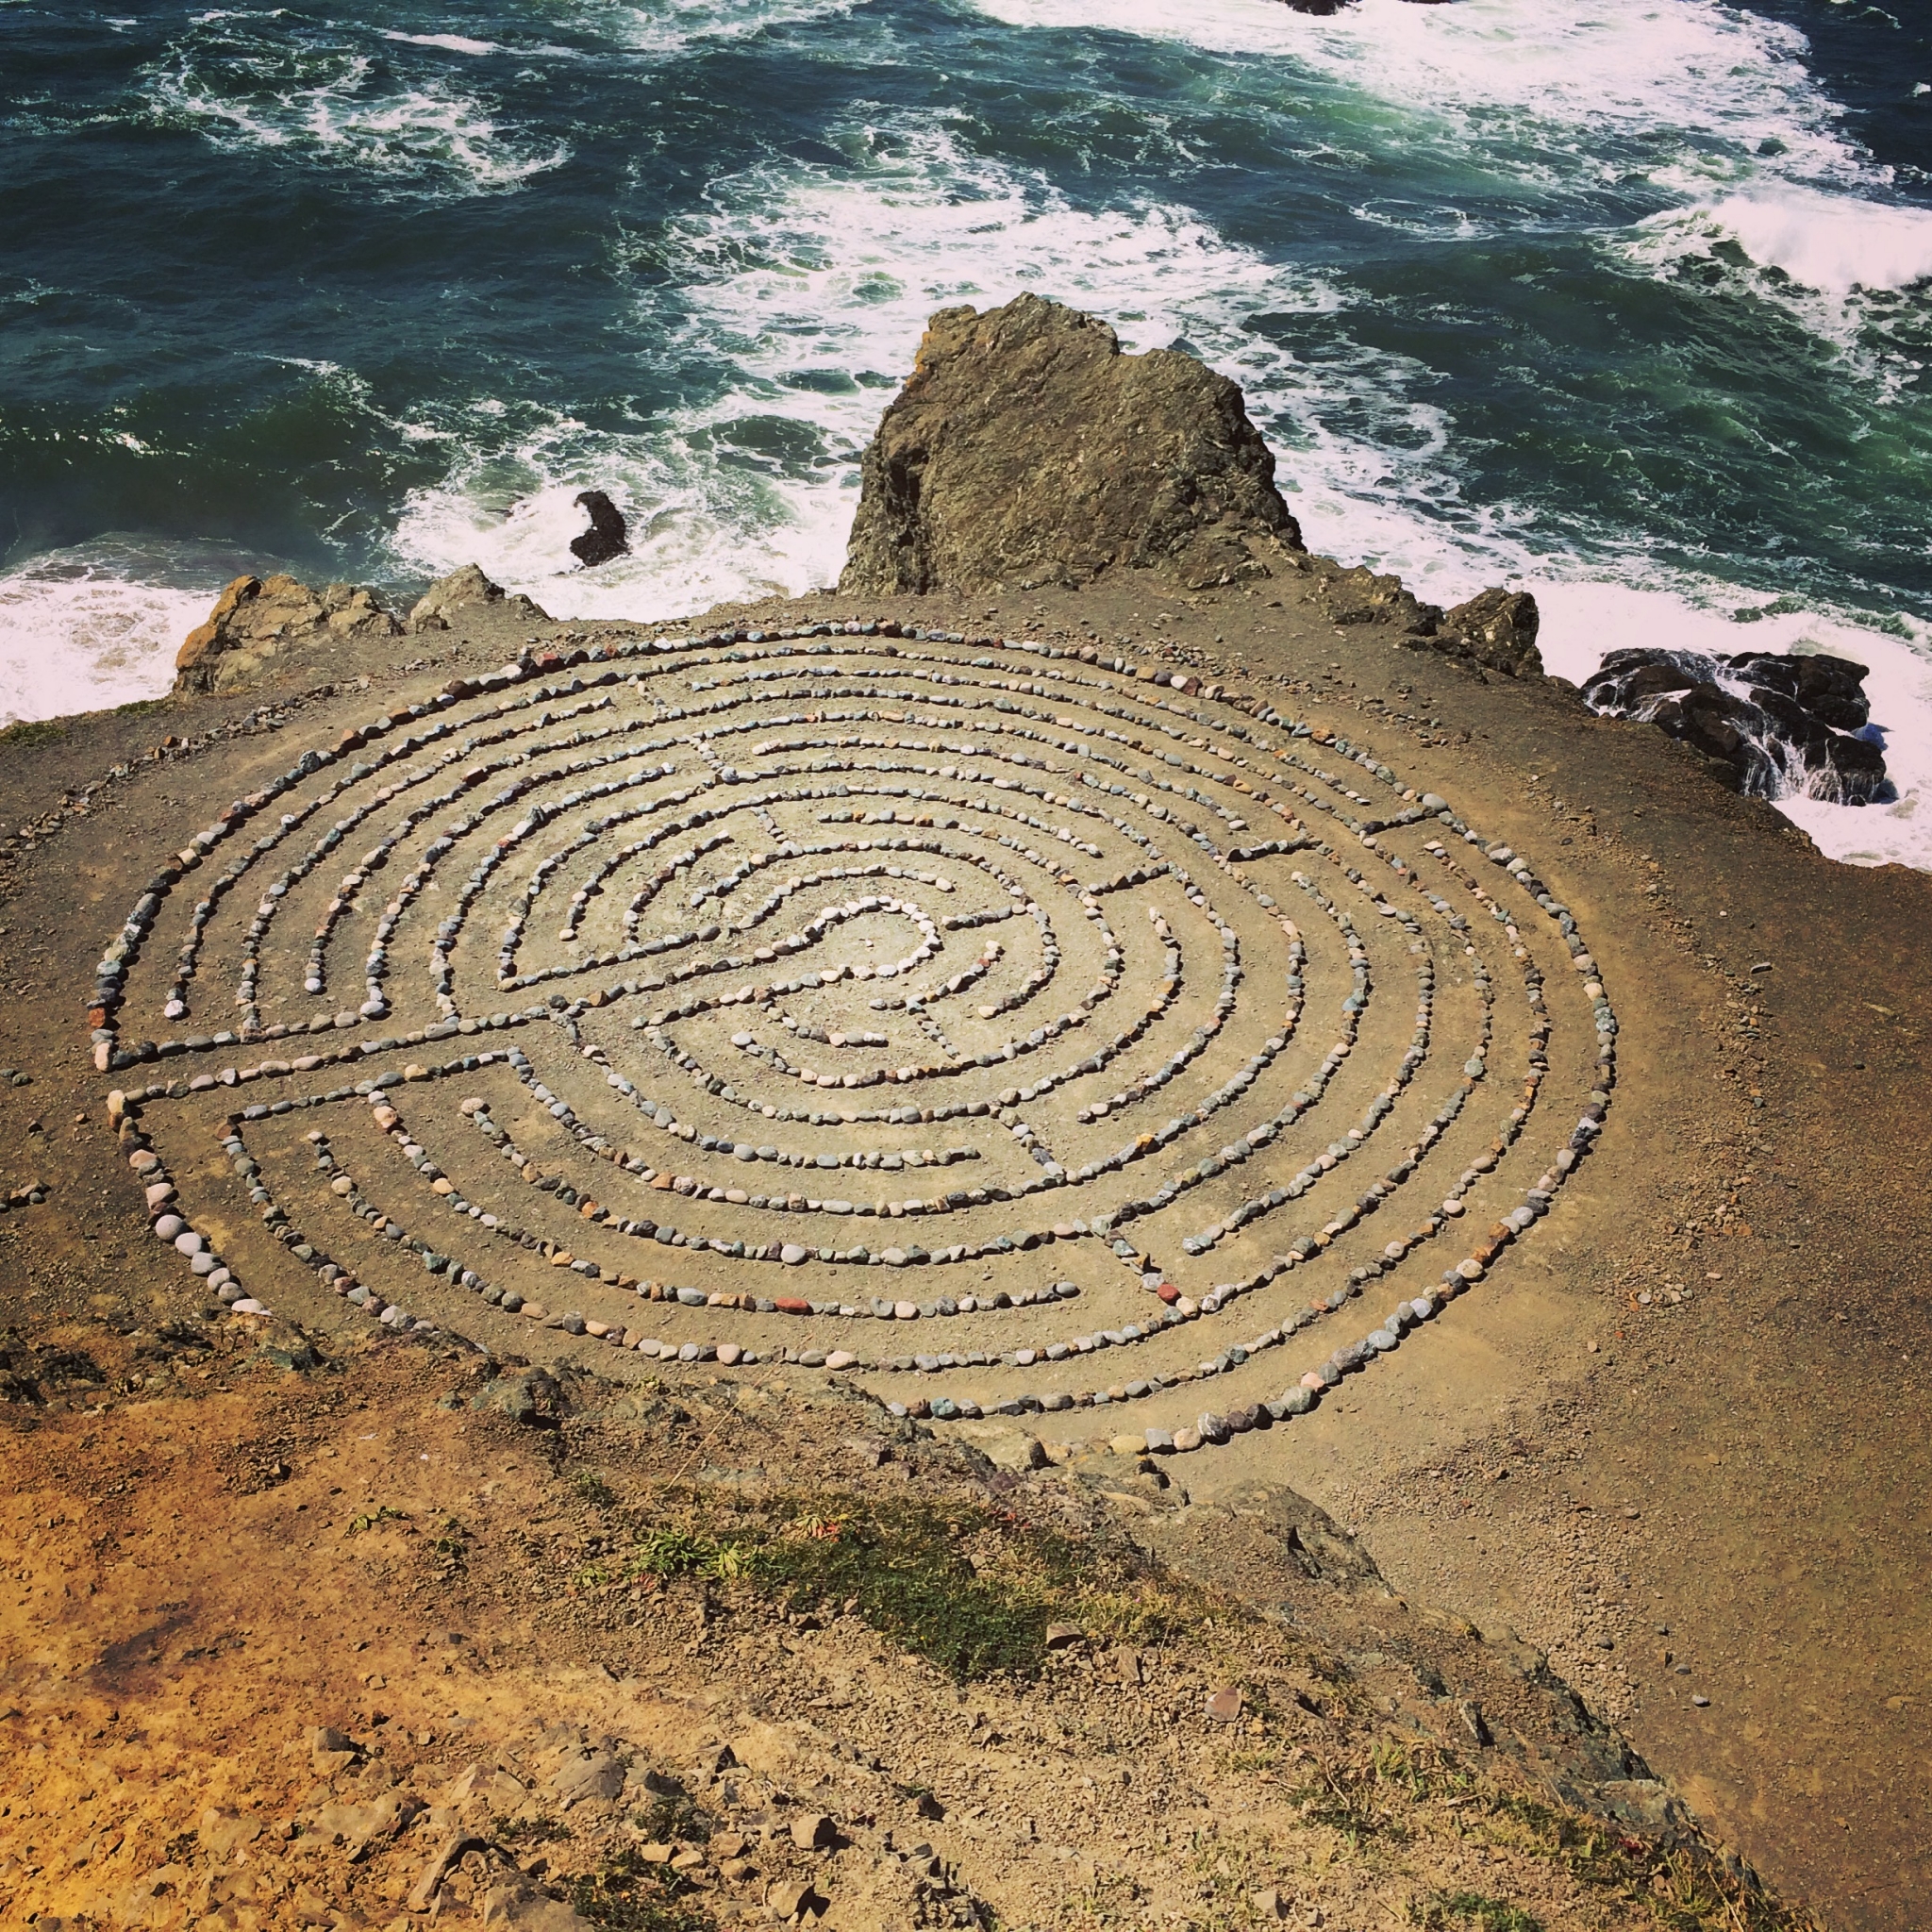 Lands End labyrinth keeper finds the way to a gratifying role